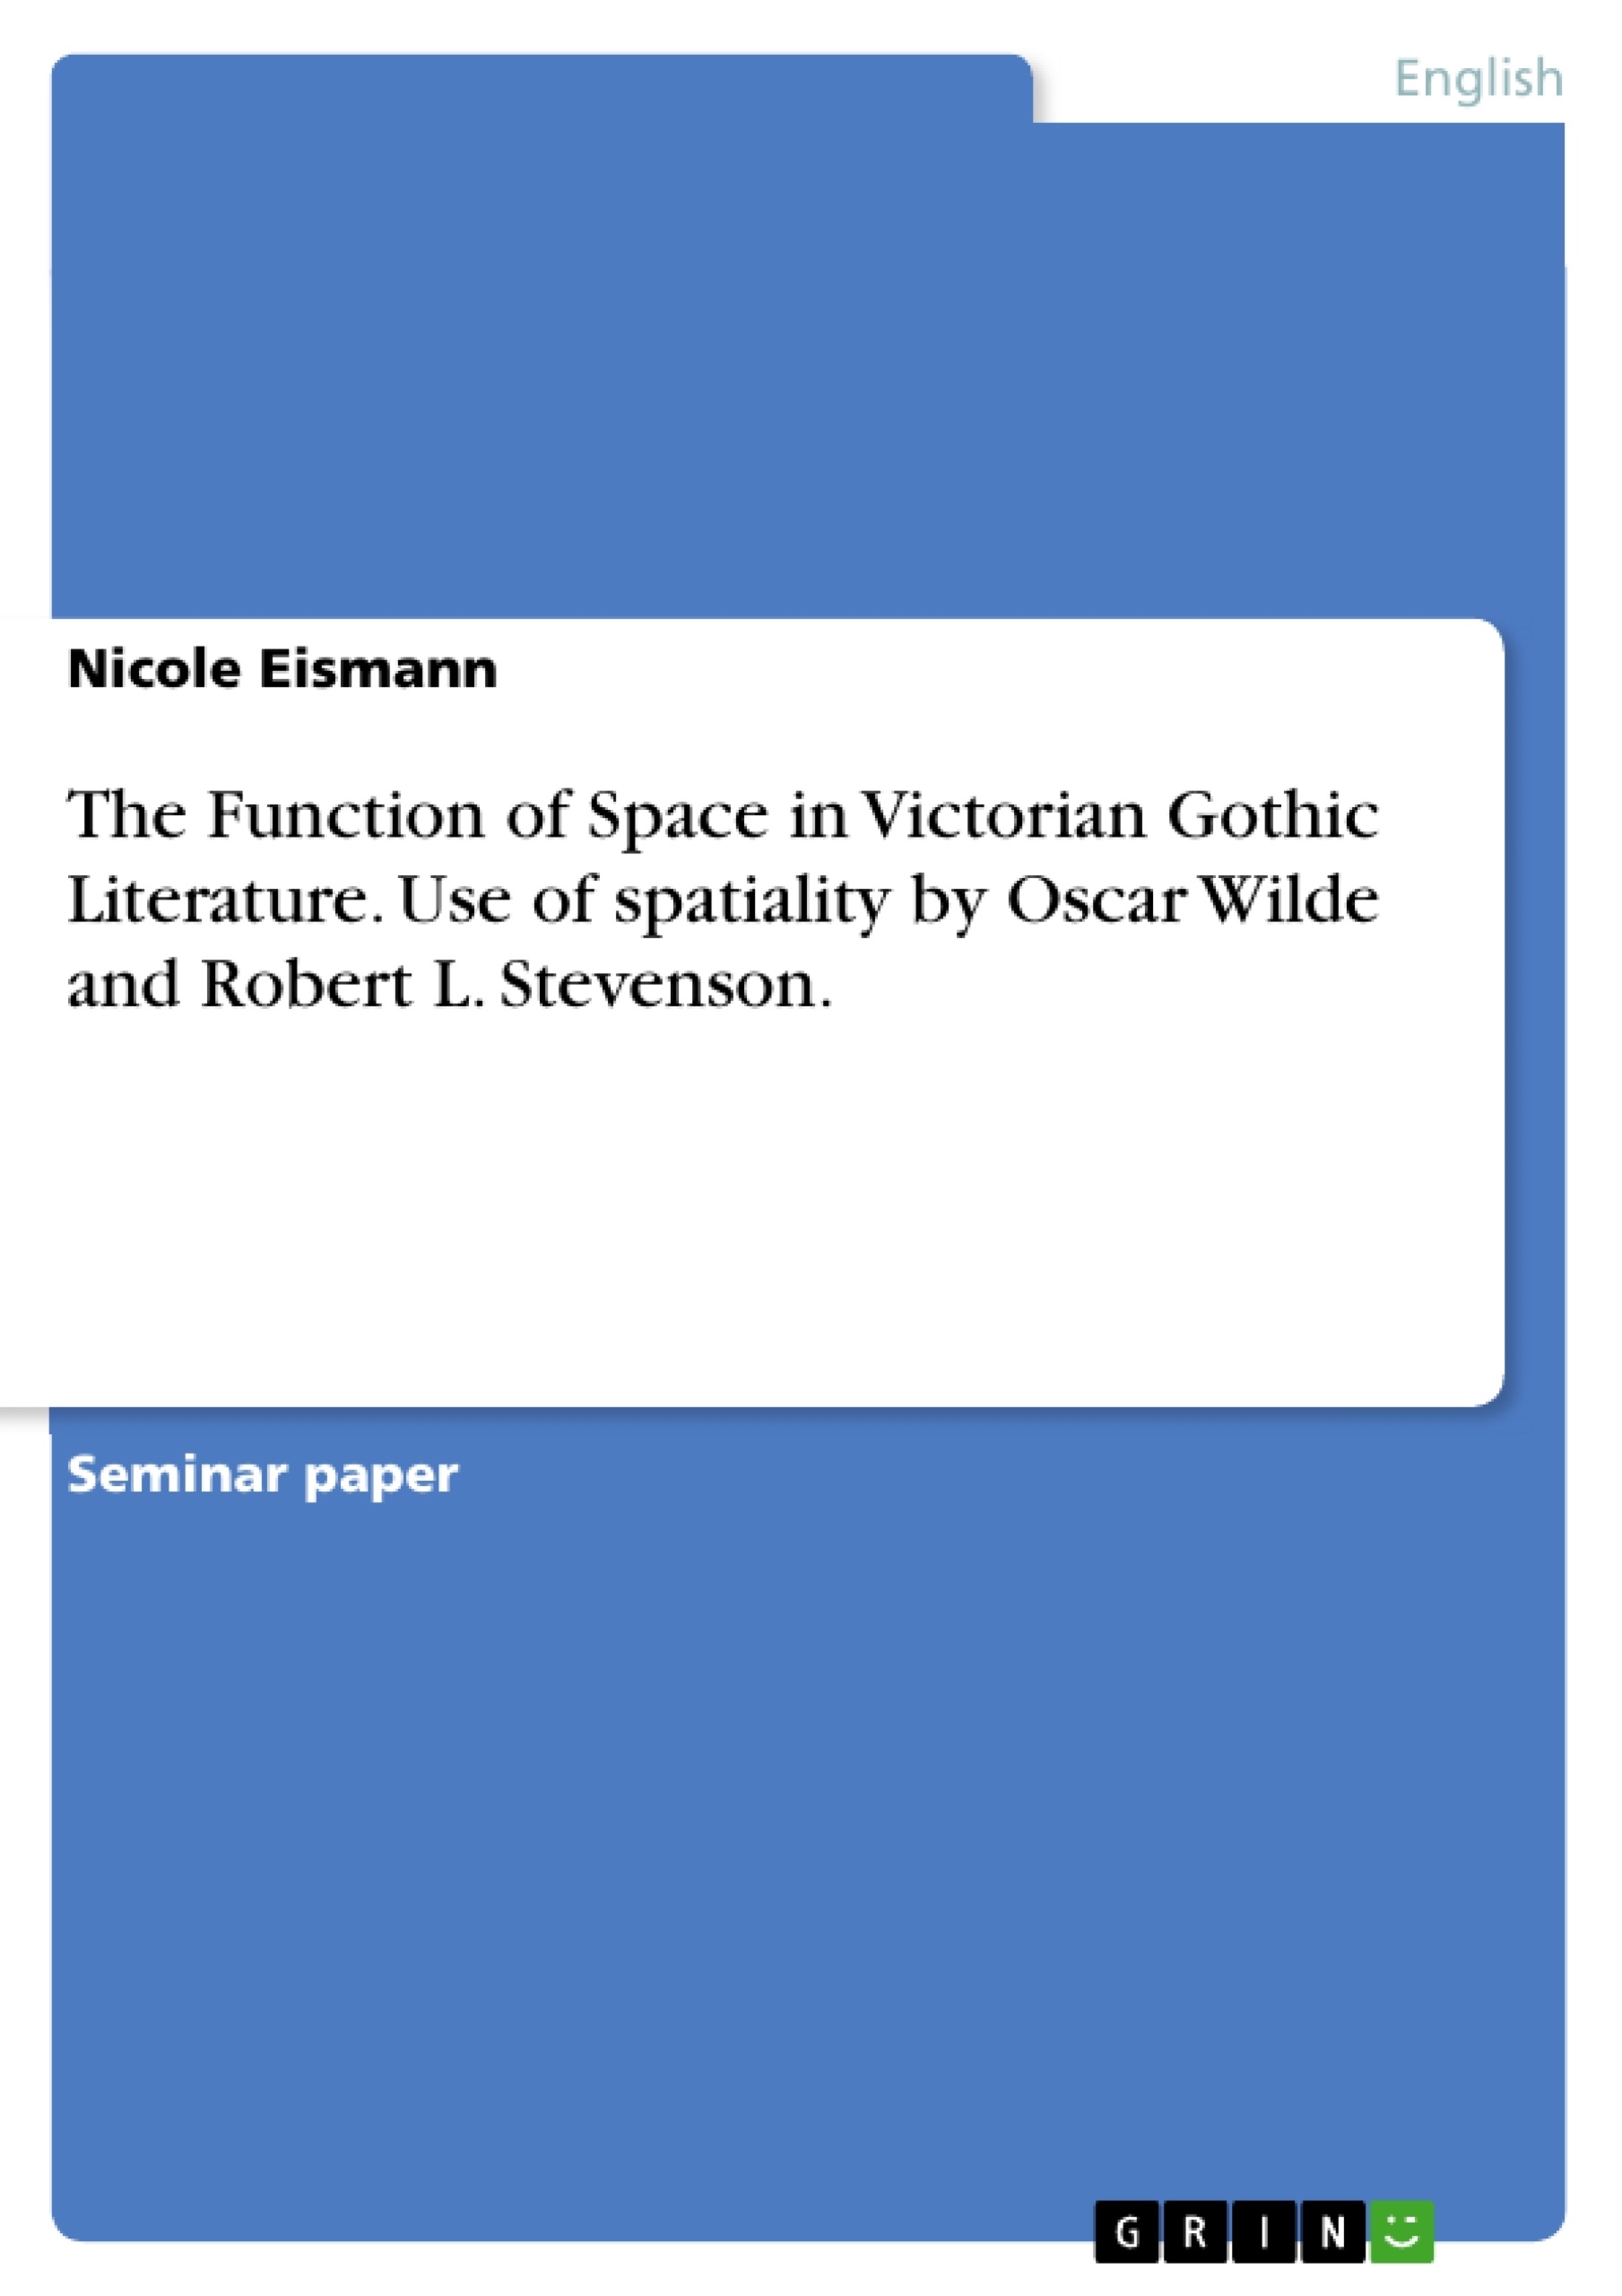 Title: The Function of Space in Victorian Gothic Literature. Use of spatiality by Oscar Wilde and Robert L. Stevenson.